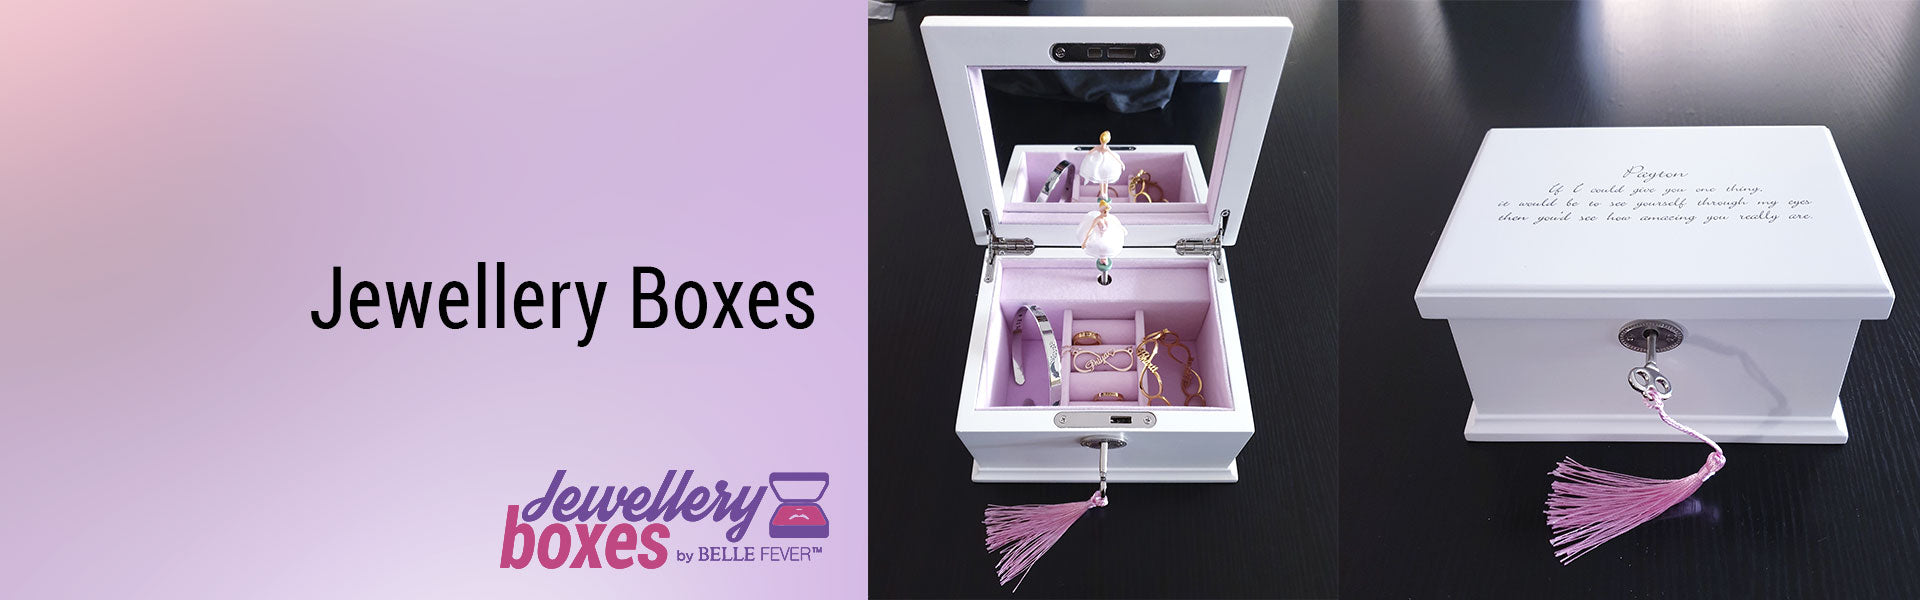 Personalised Jewellery Boxes by belle Fever